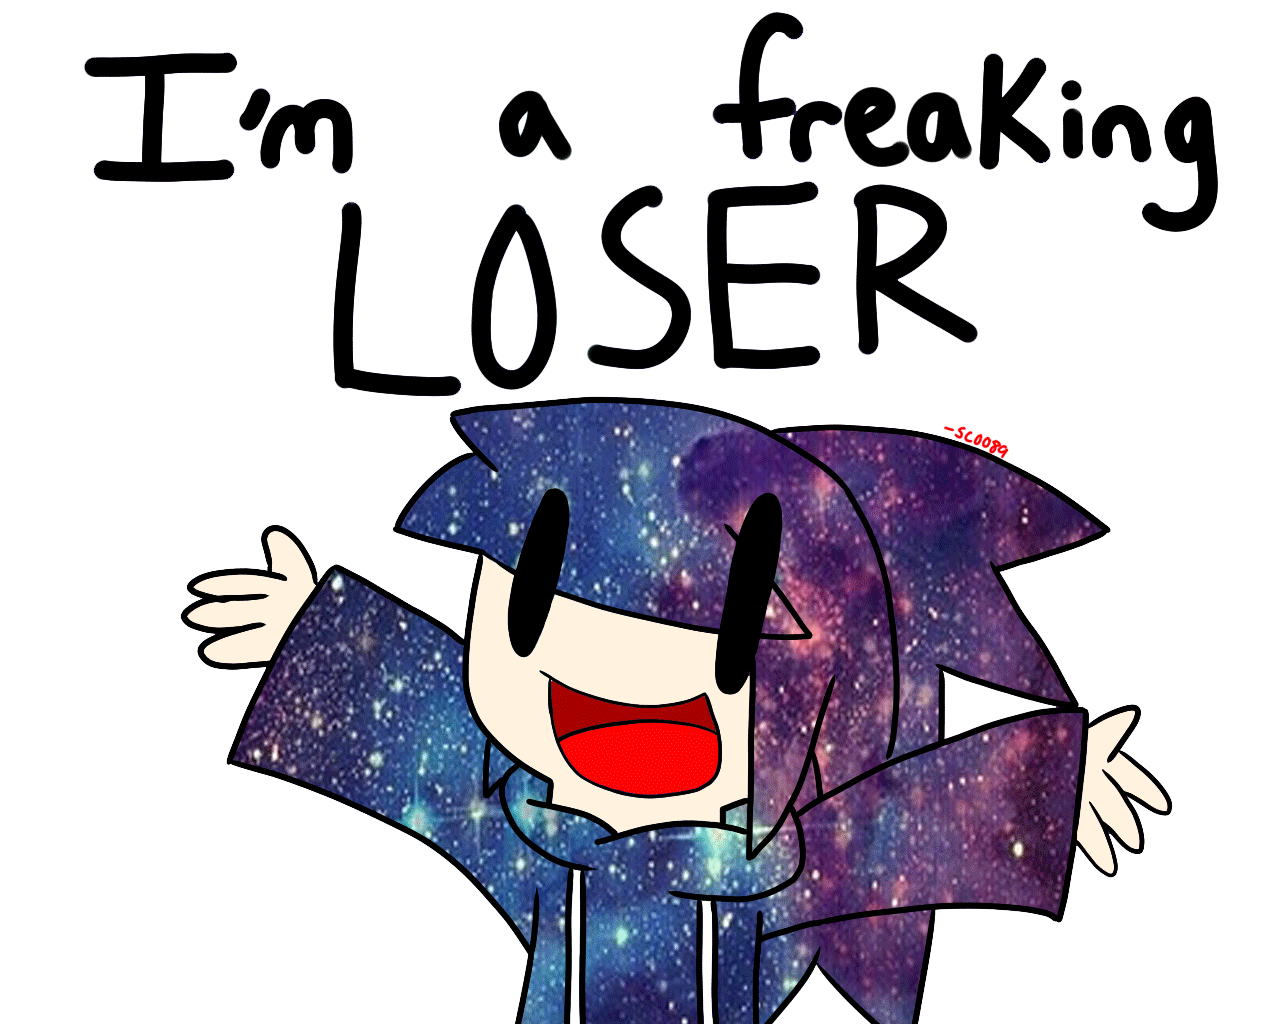 GIF) I'M A FREAKING LOSER by ShAcKmO on DeviantArt